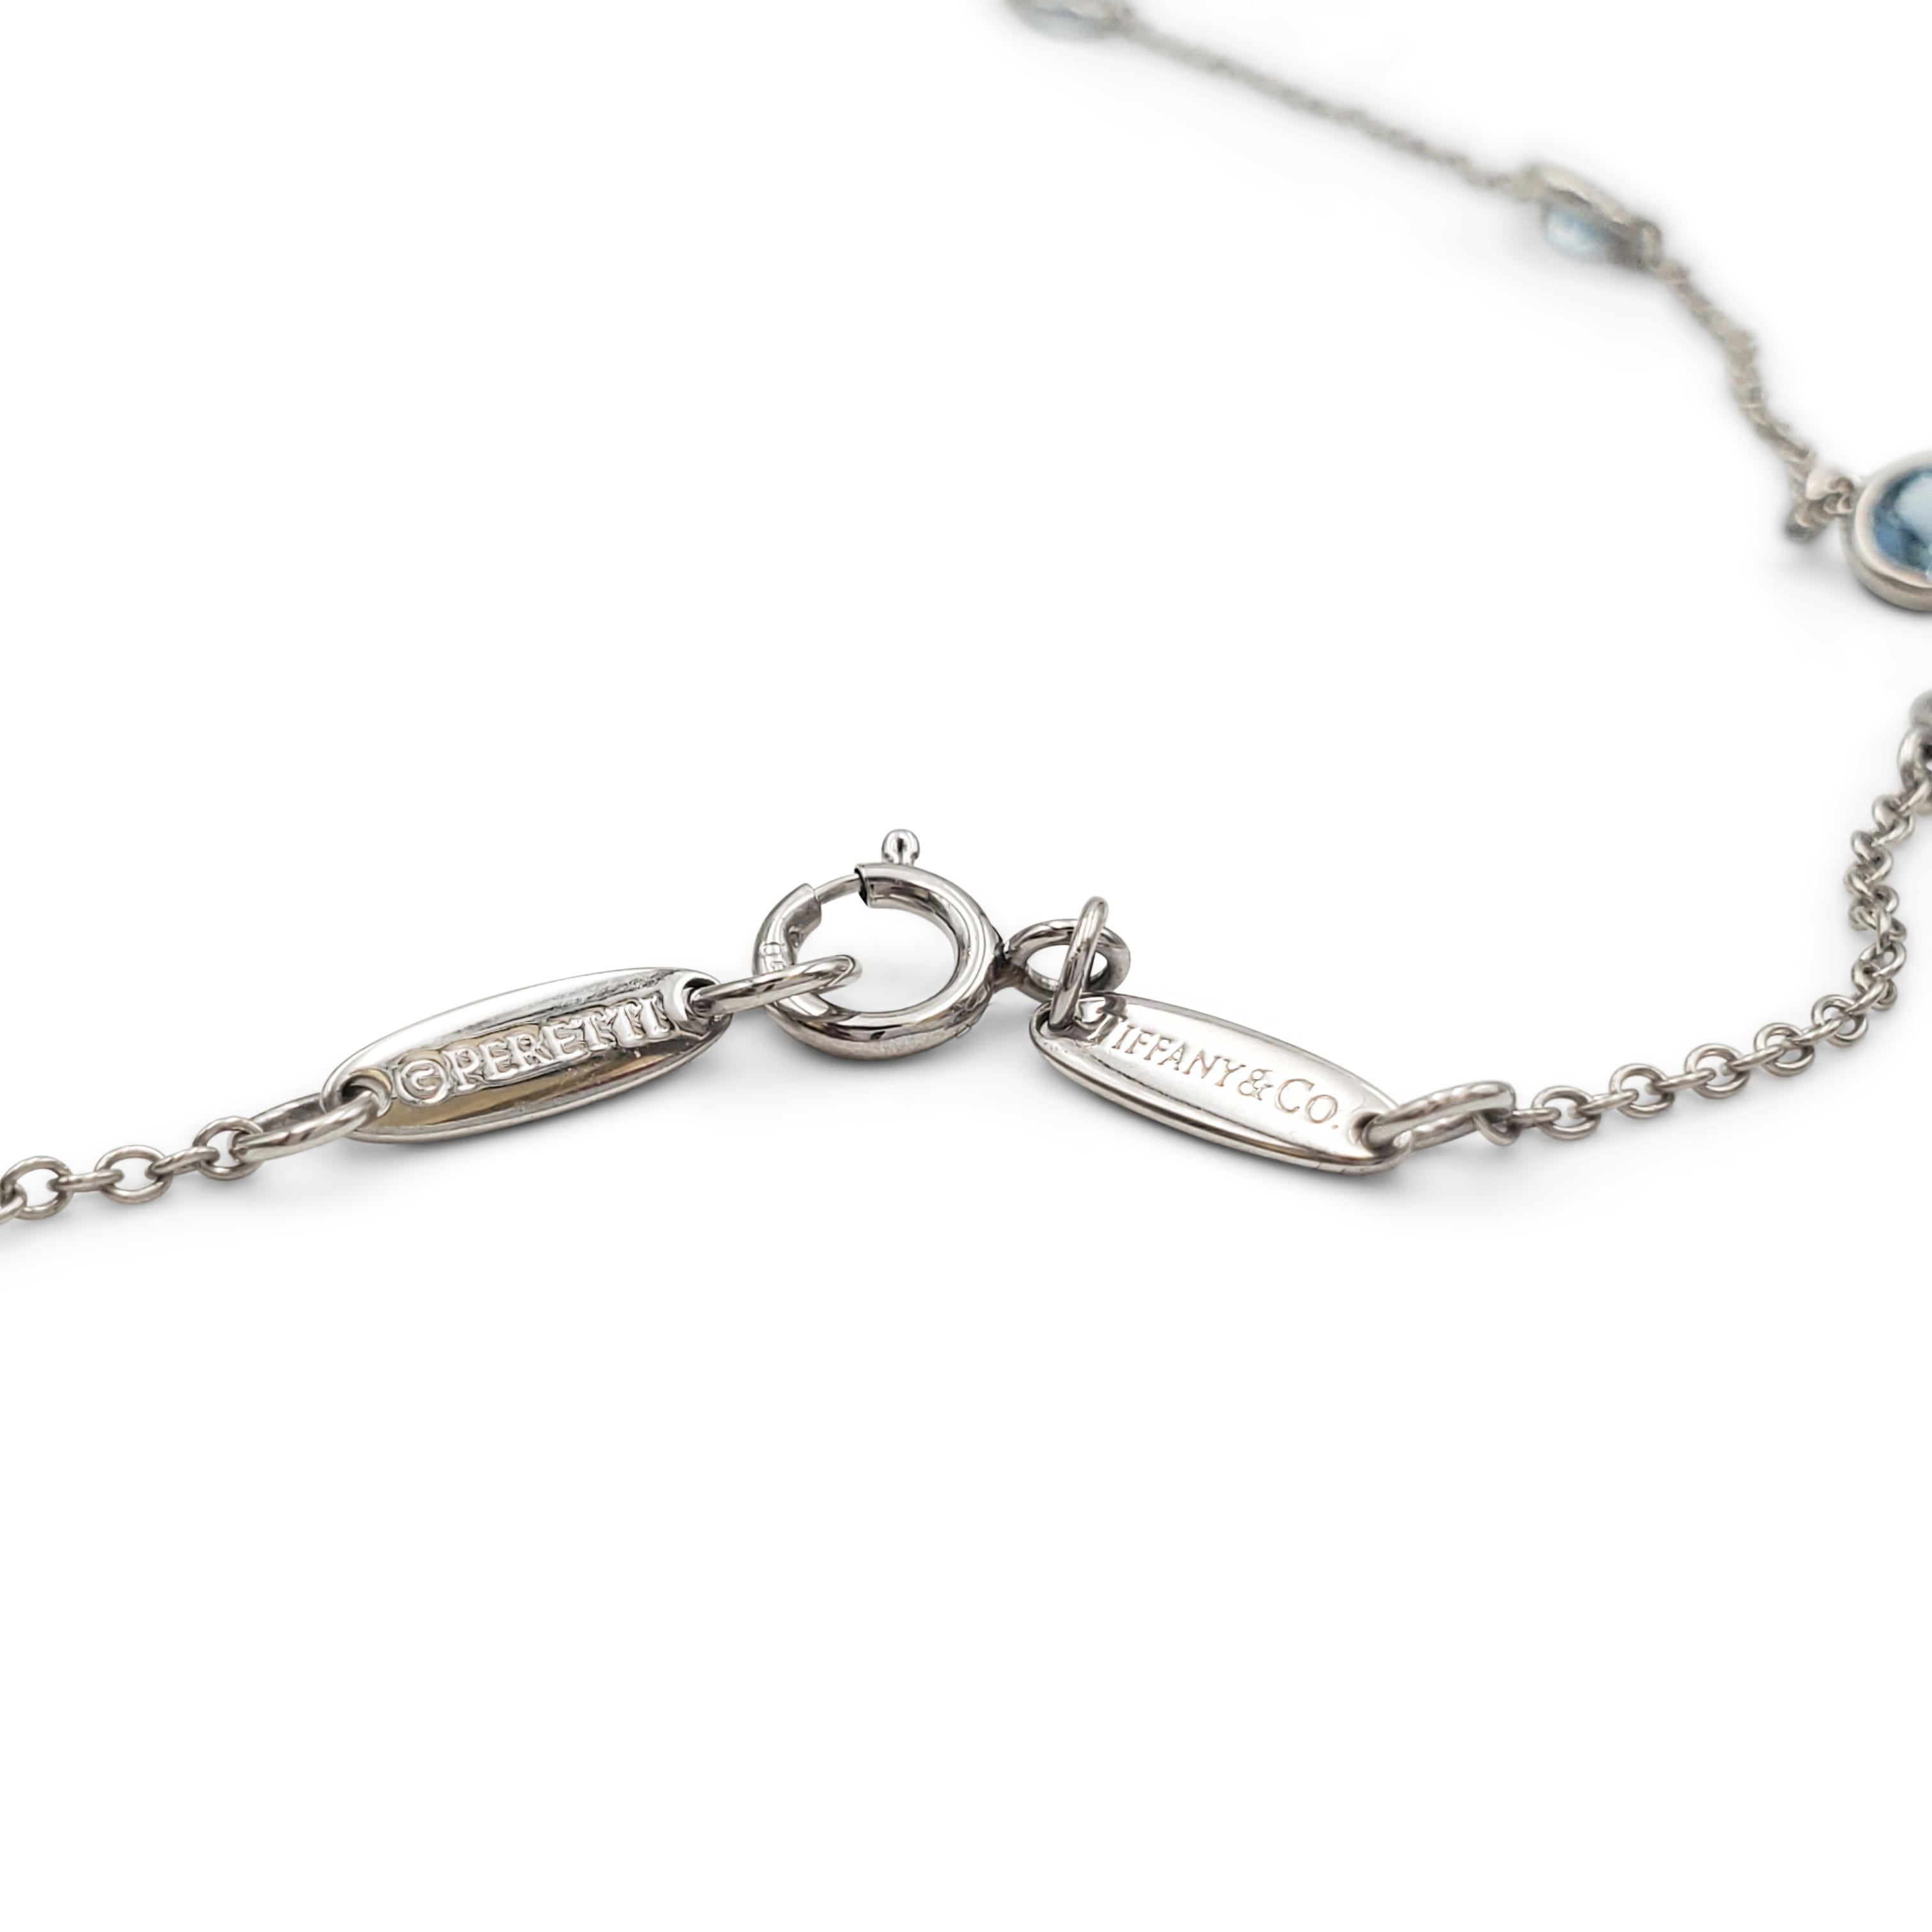 Women's or Men's Elsa Peretti for Tiffany & Co. 'Color by the Yard' Aquamarine Necklace